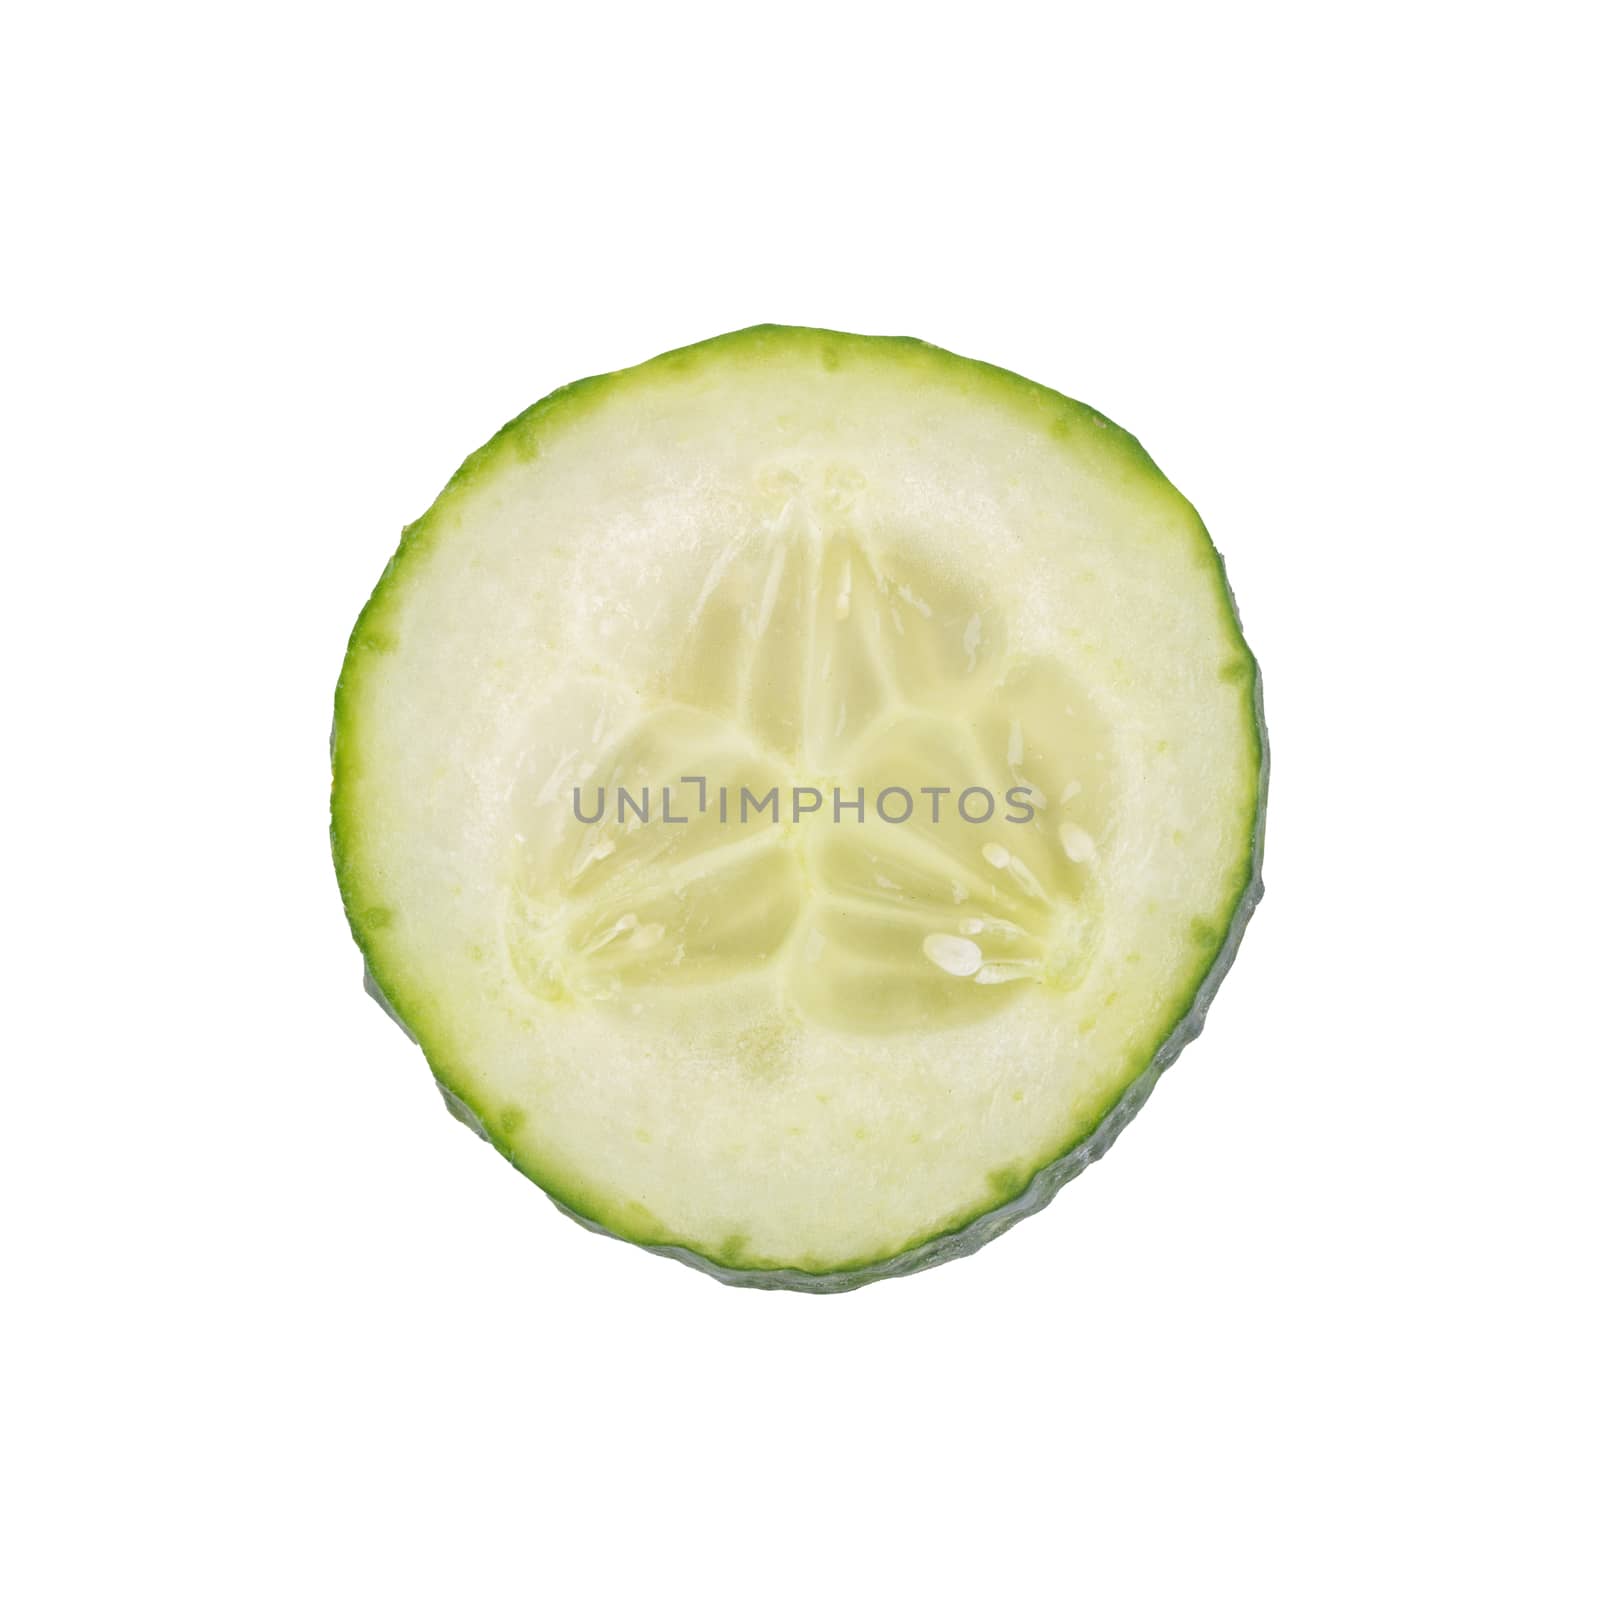 A slice of cucumber isolated on a white background